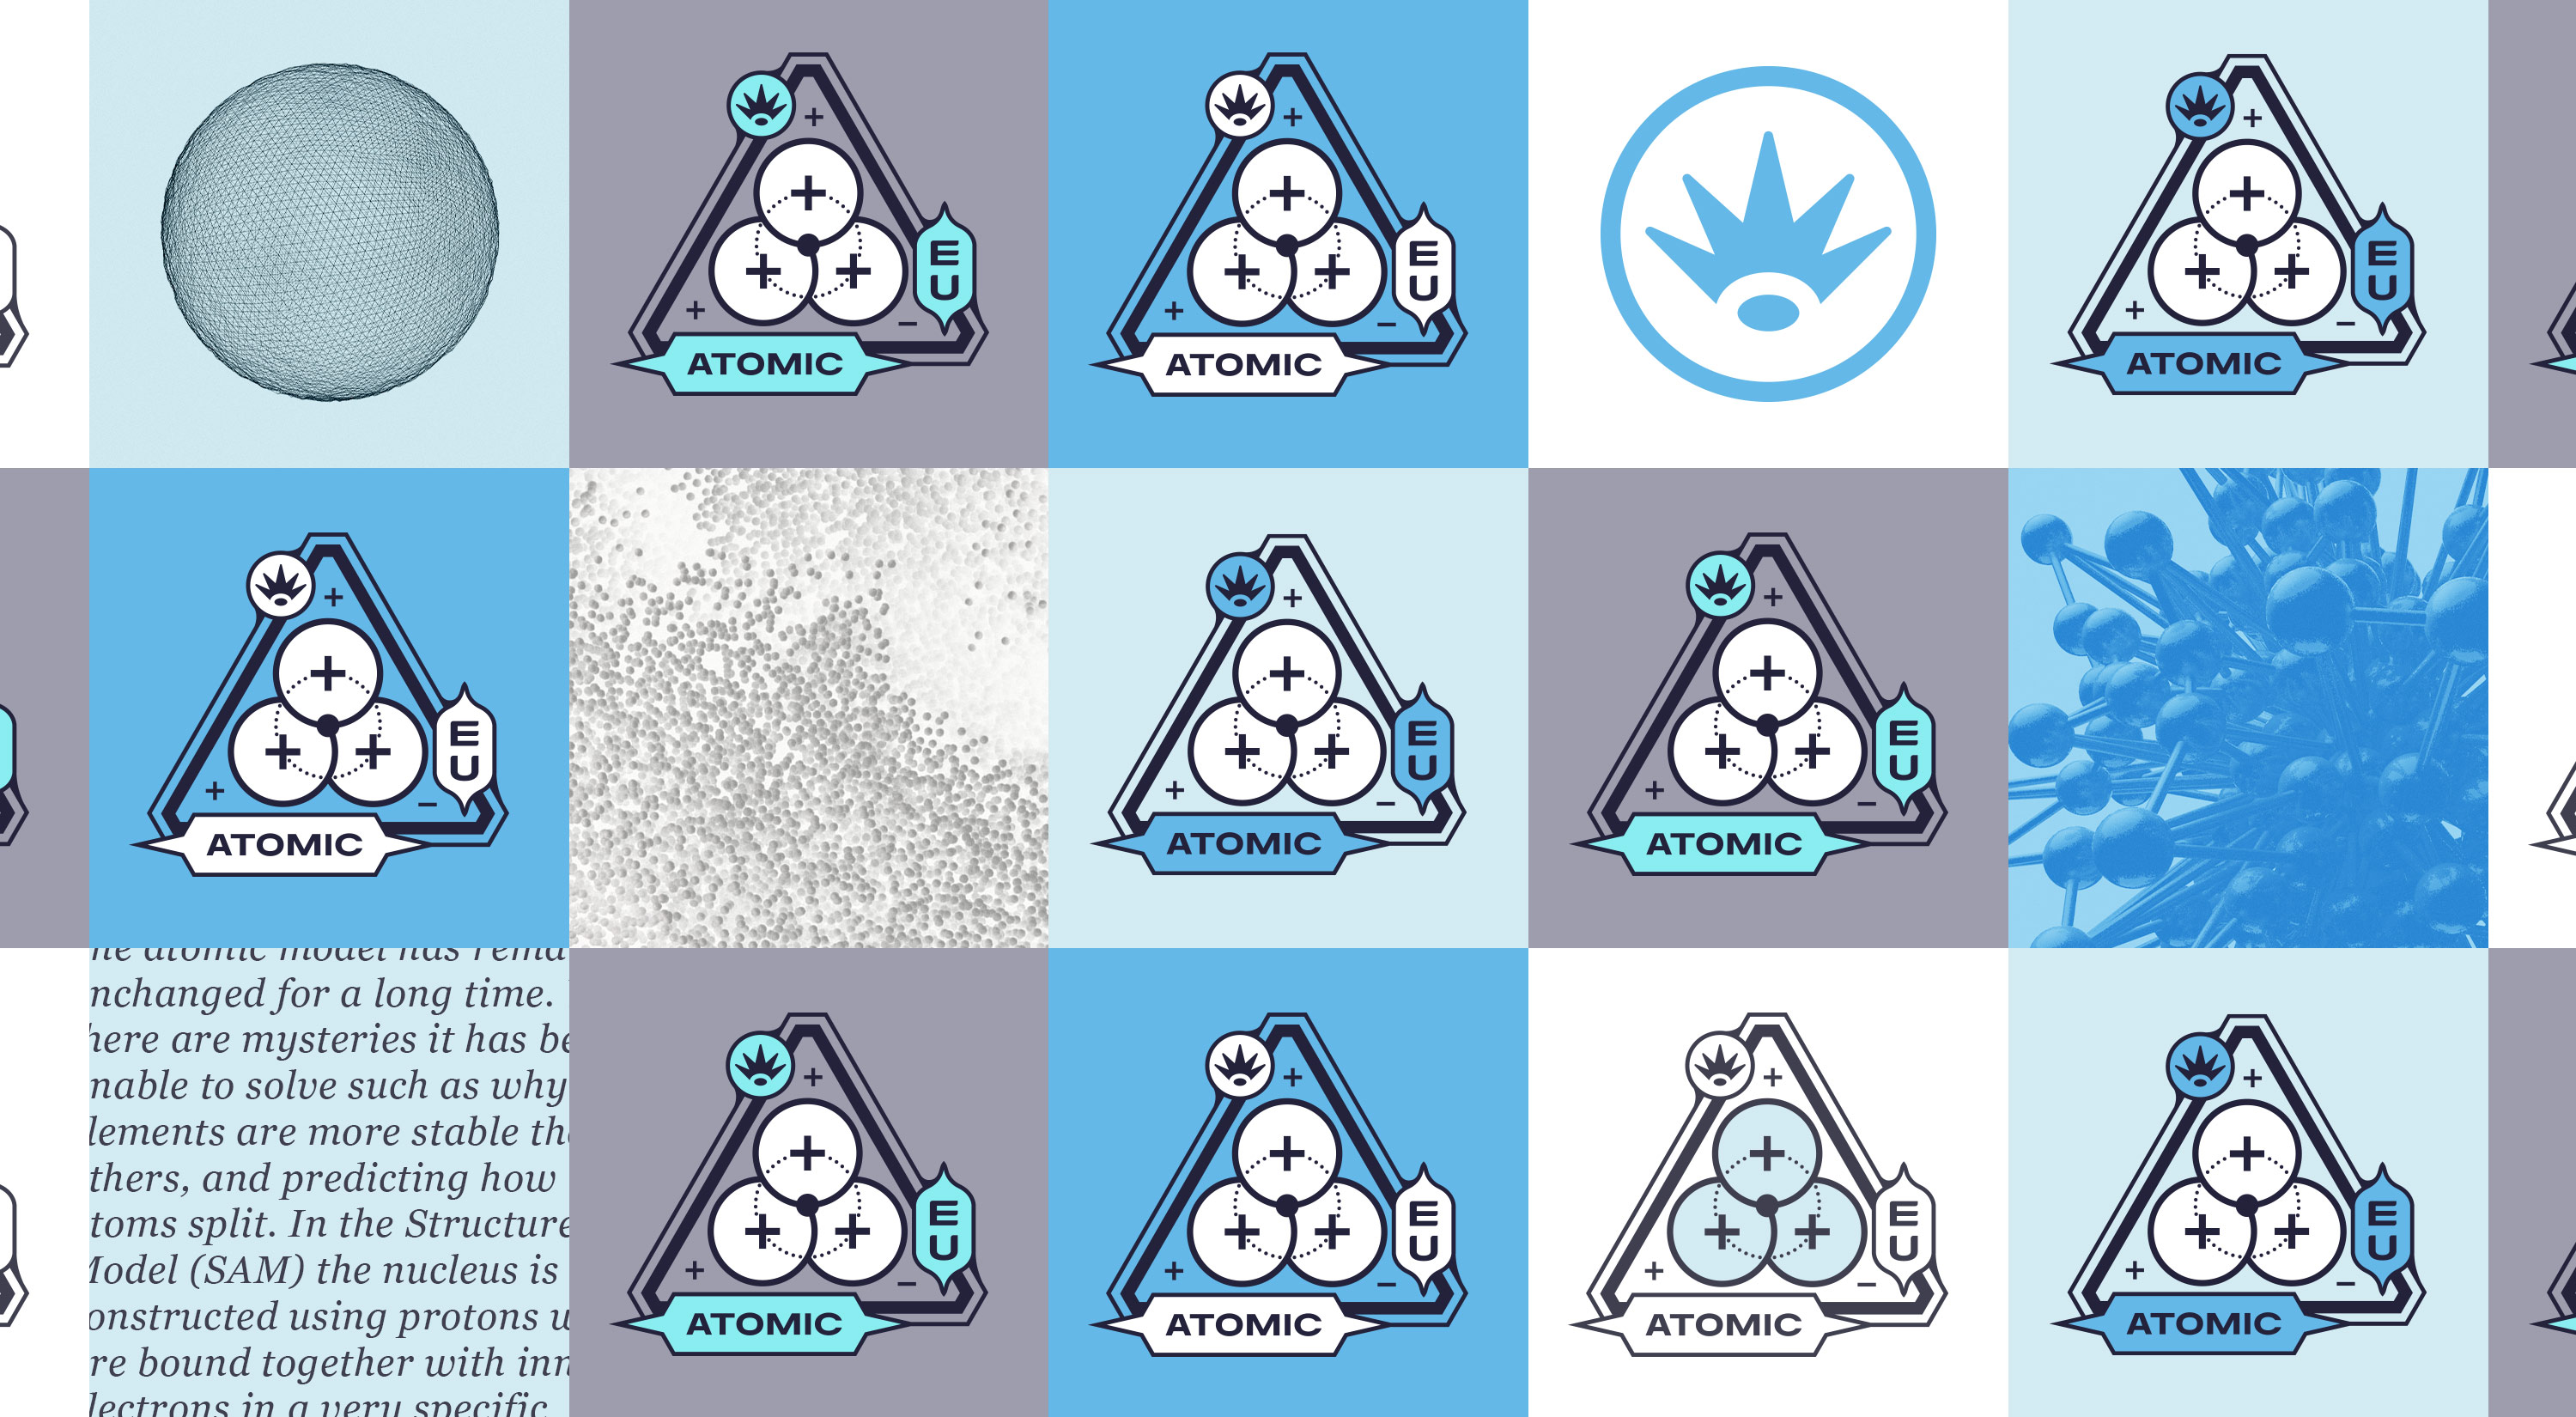 Multiple Atomic Science Crest Logo Designs on Different Backgrounds